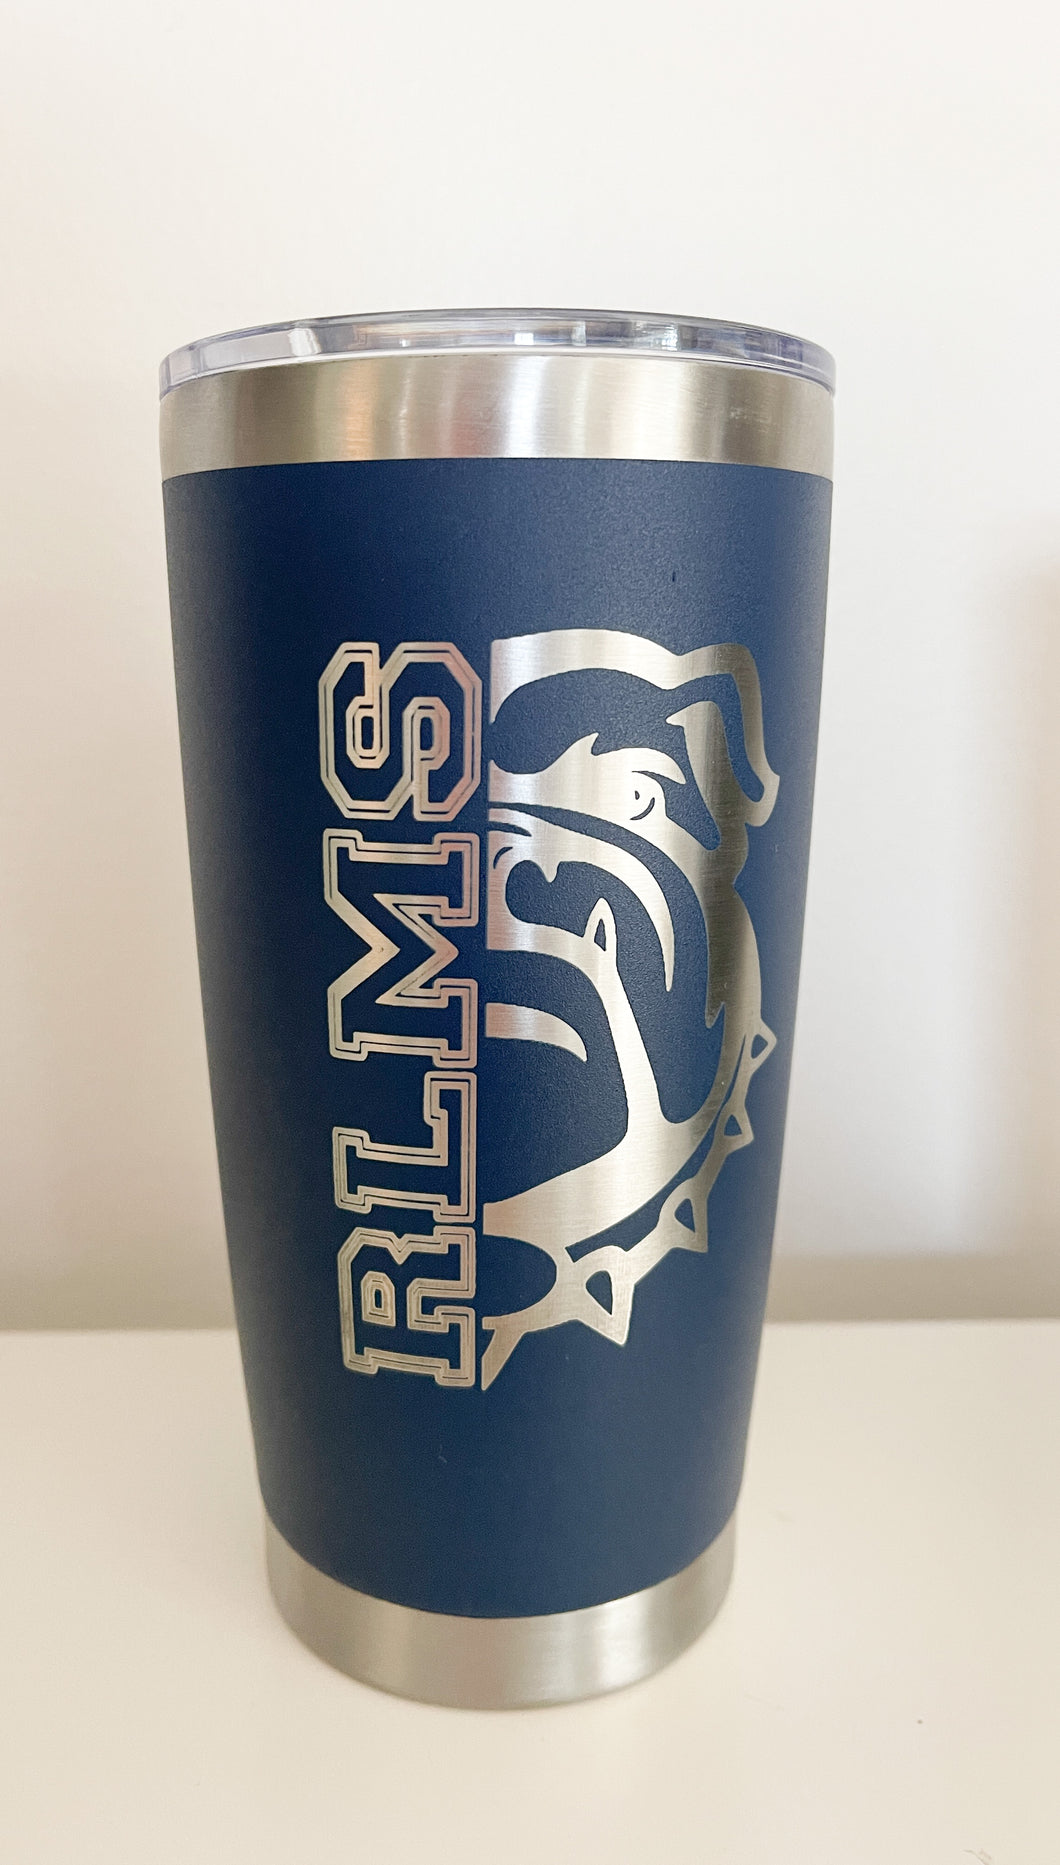 Roger Ludlowe Middle School (RLMS) Personalized Lasered Engraved Stainless Steel Tumblers